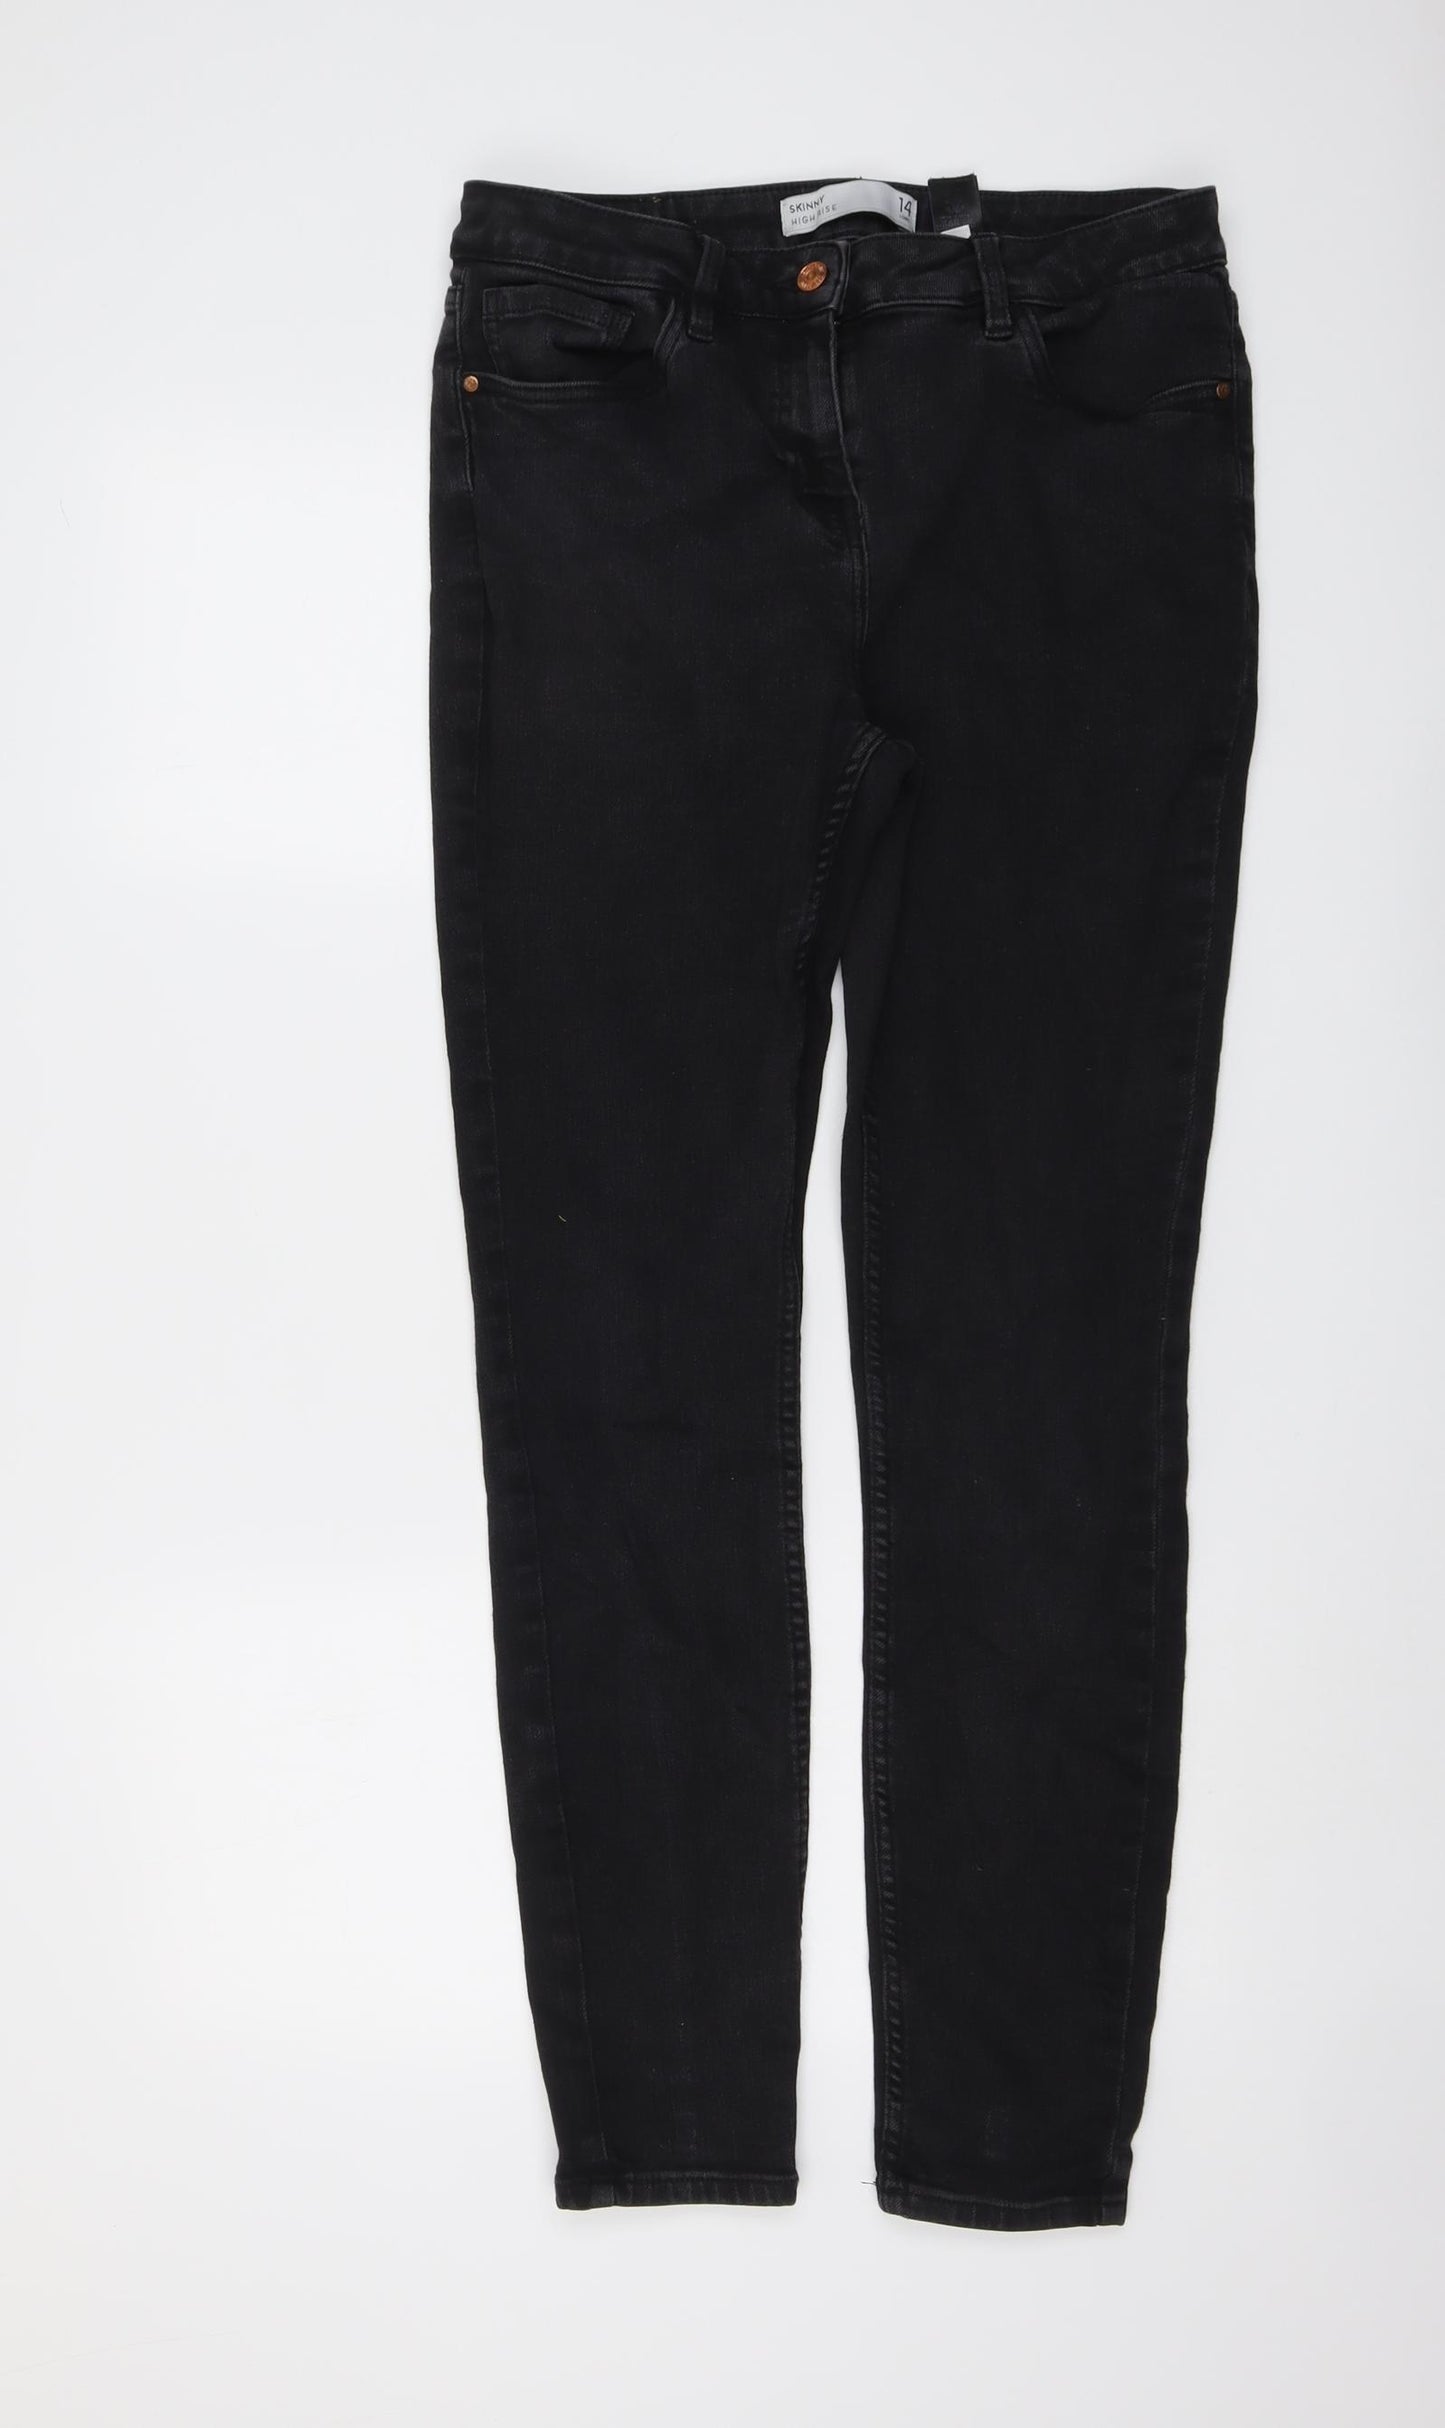 NEXT Womens Black Cotton Skinny Jeans Size 14 L30 in Regular Button